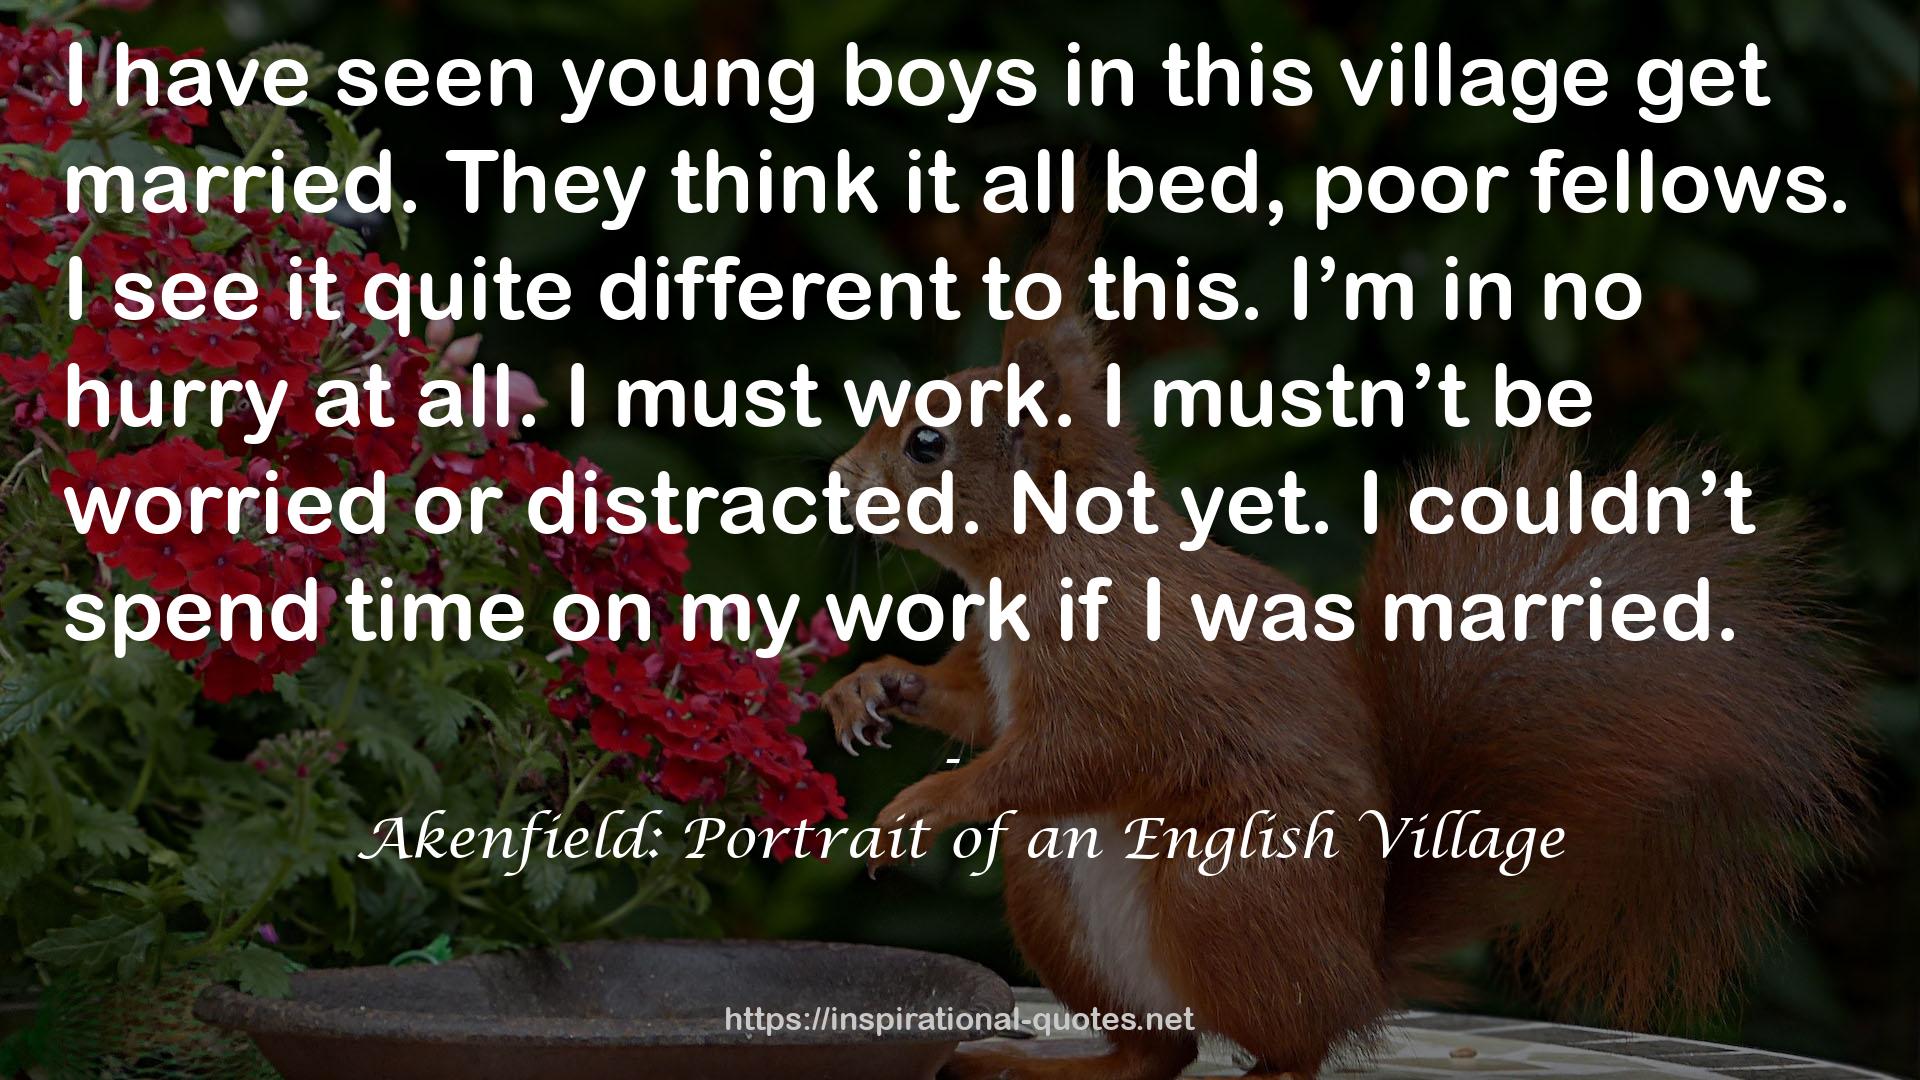 Akenfield: Portrait of an English Village QUOTES